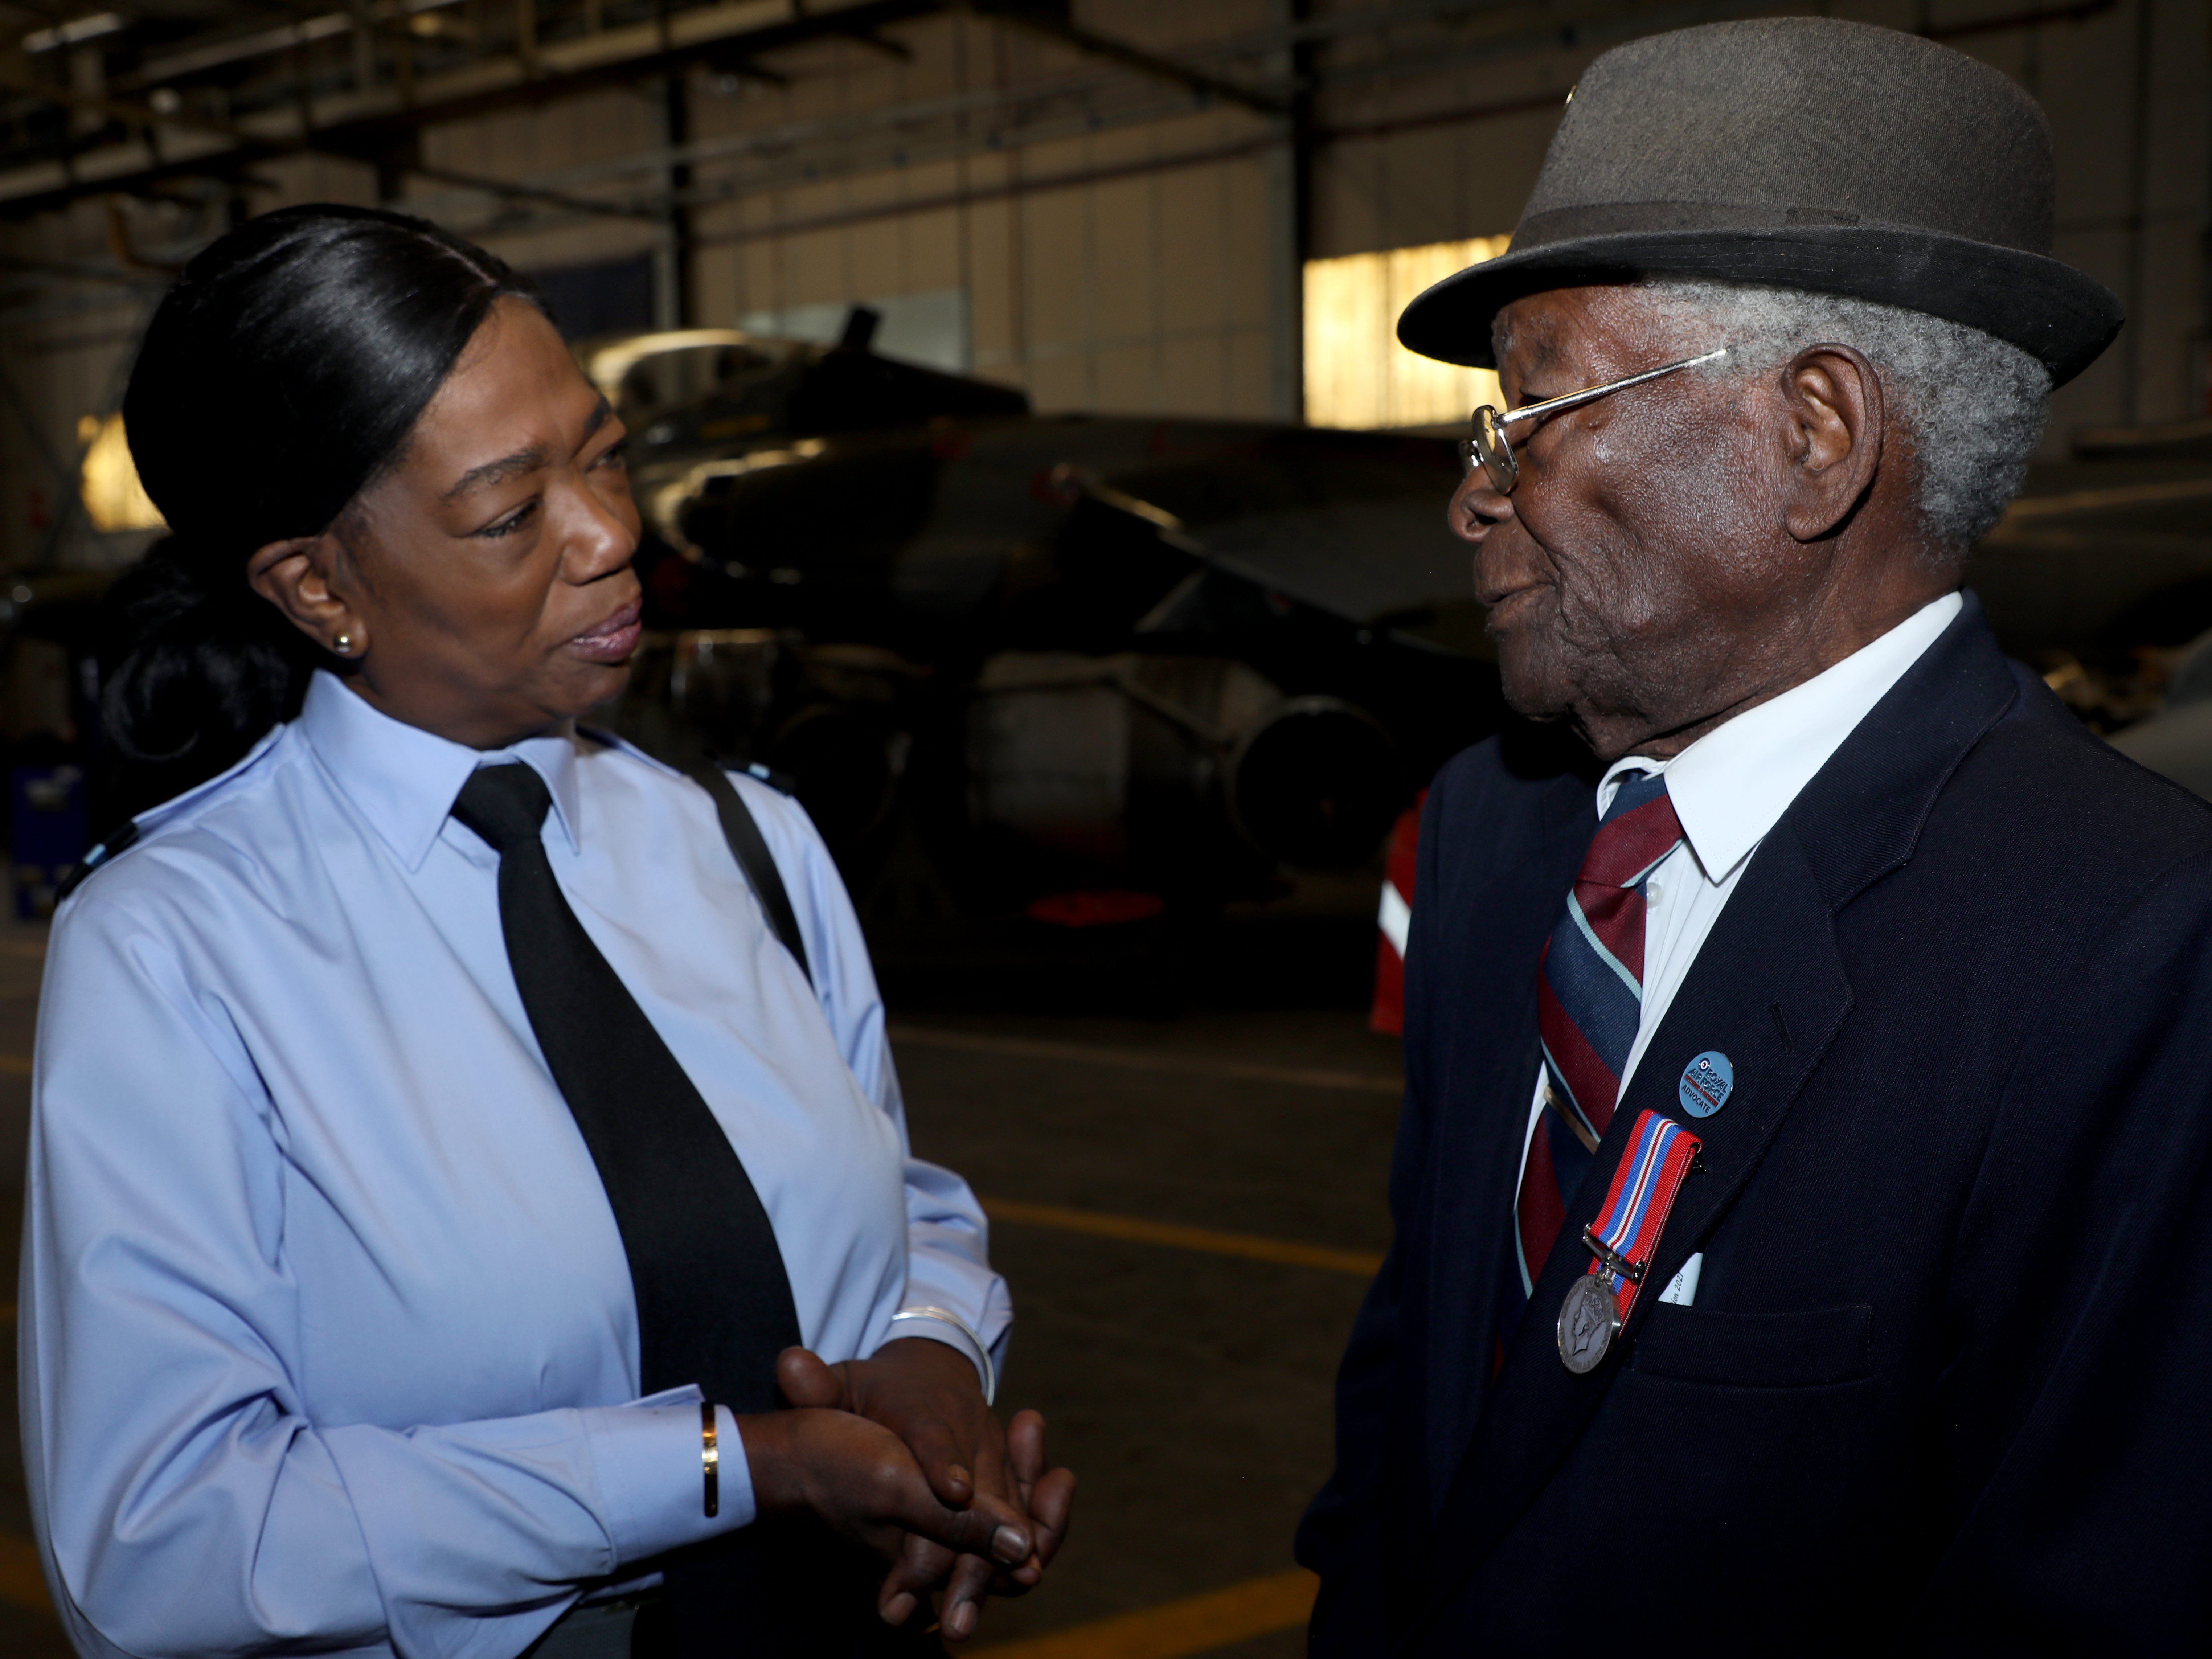 From left to right: Honorary Air Commodore for 7644 Public Relations Squadron, Dr Marcia McLaughlin and Mr Albert Jarrett